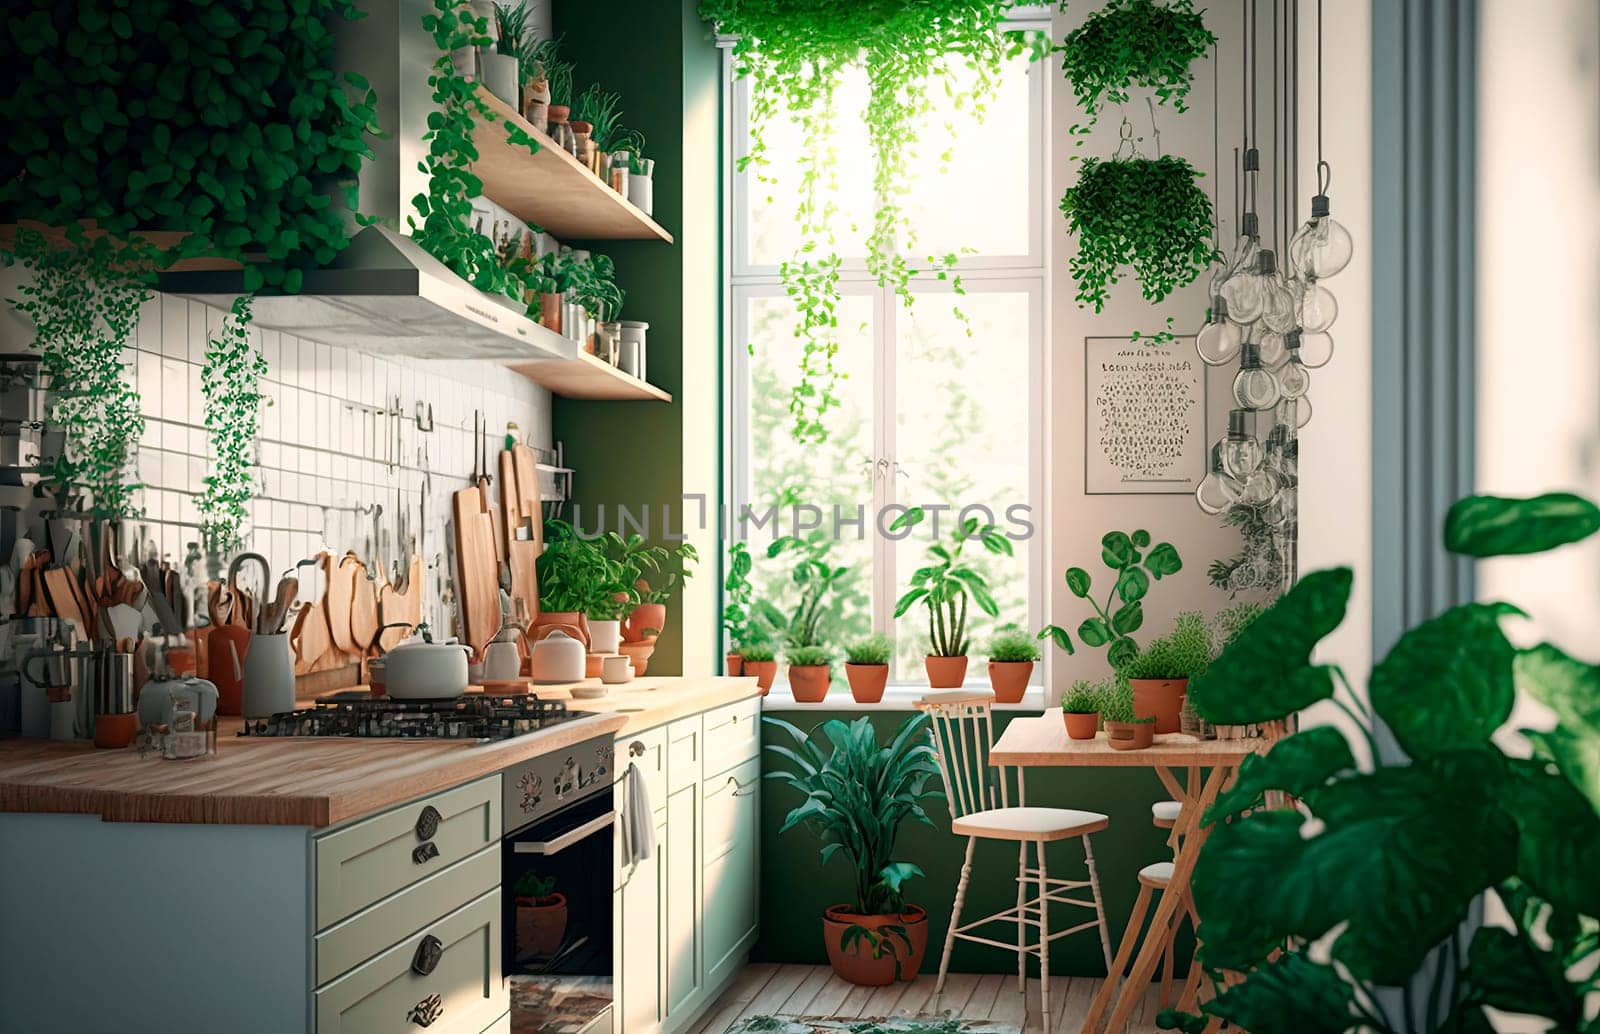 The interior of the kitchen is a lot of green plants. by yanadjana